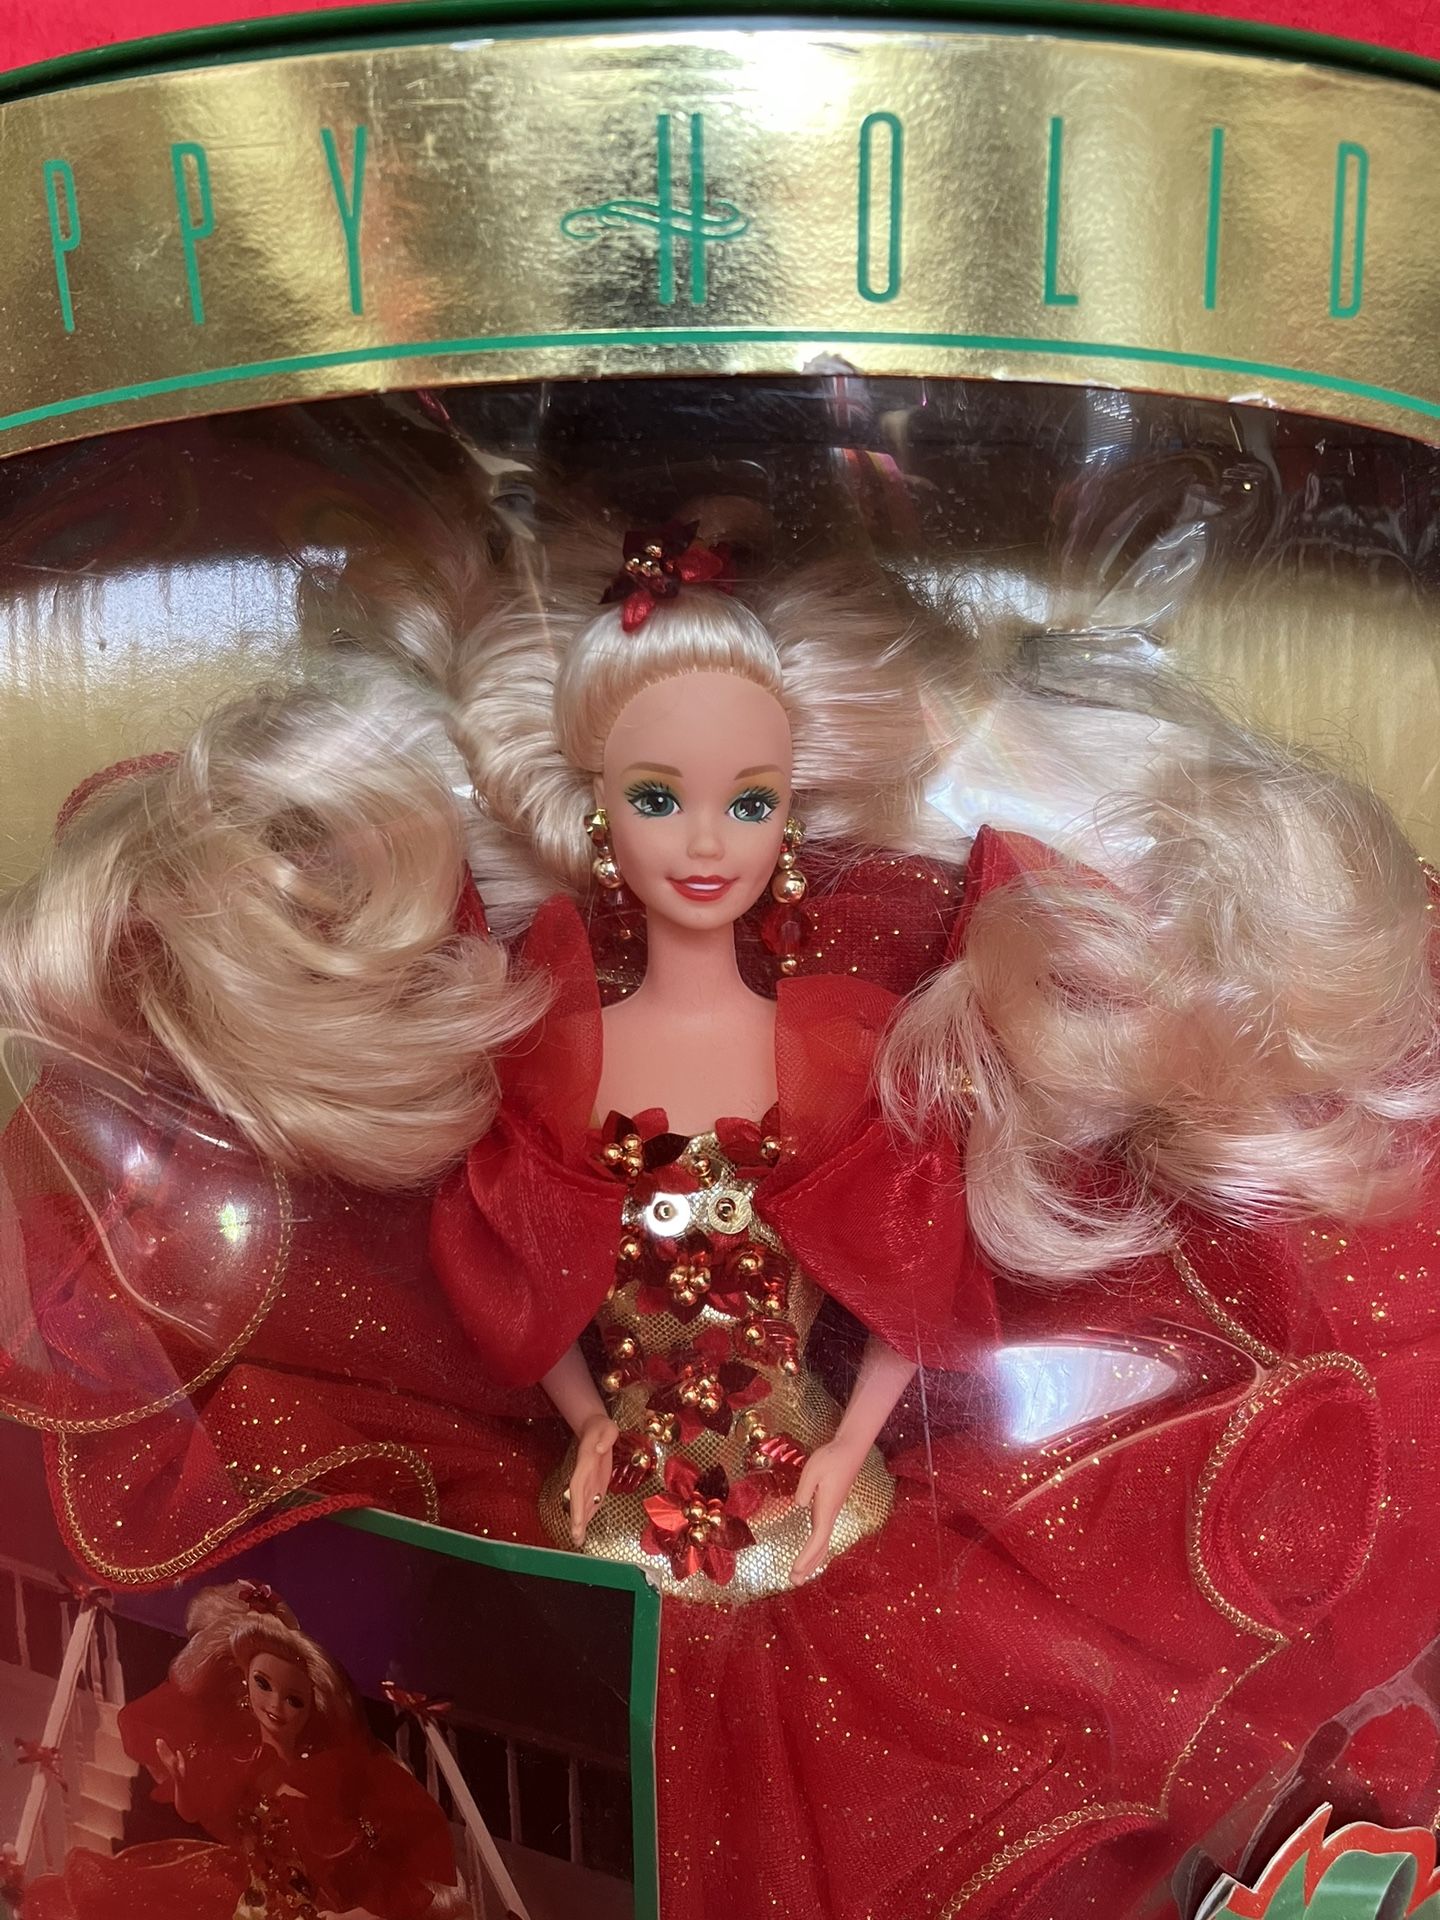 NEW Vintage BARBIE DOLL HAPPY HOLIDAY SPECIAL EDITION 1993 ‼️ BOX DAMAGED ‼️ Price Is FIRM ‼️ See HUGE Collection ALL MUST GO ‼️ See Pictures ..